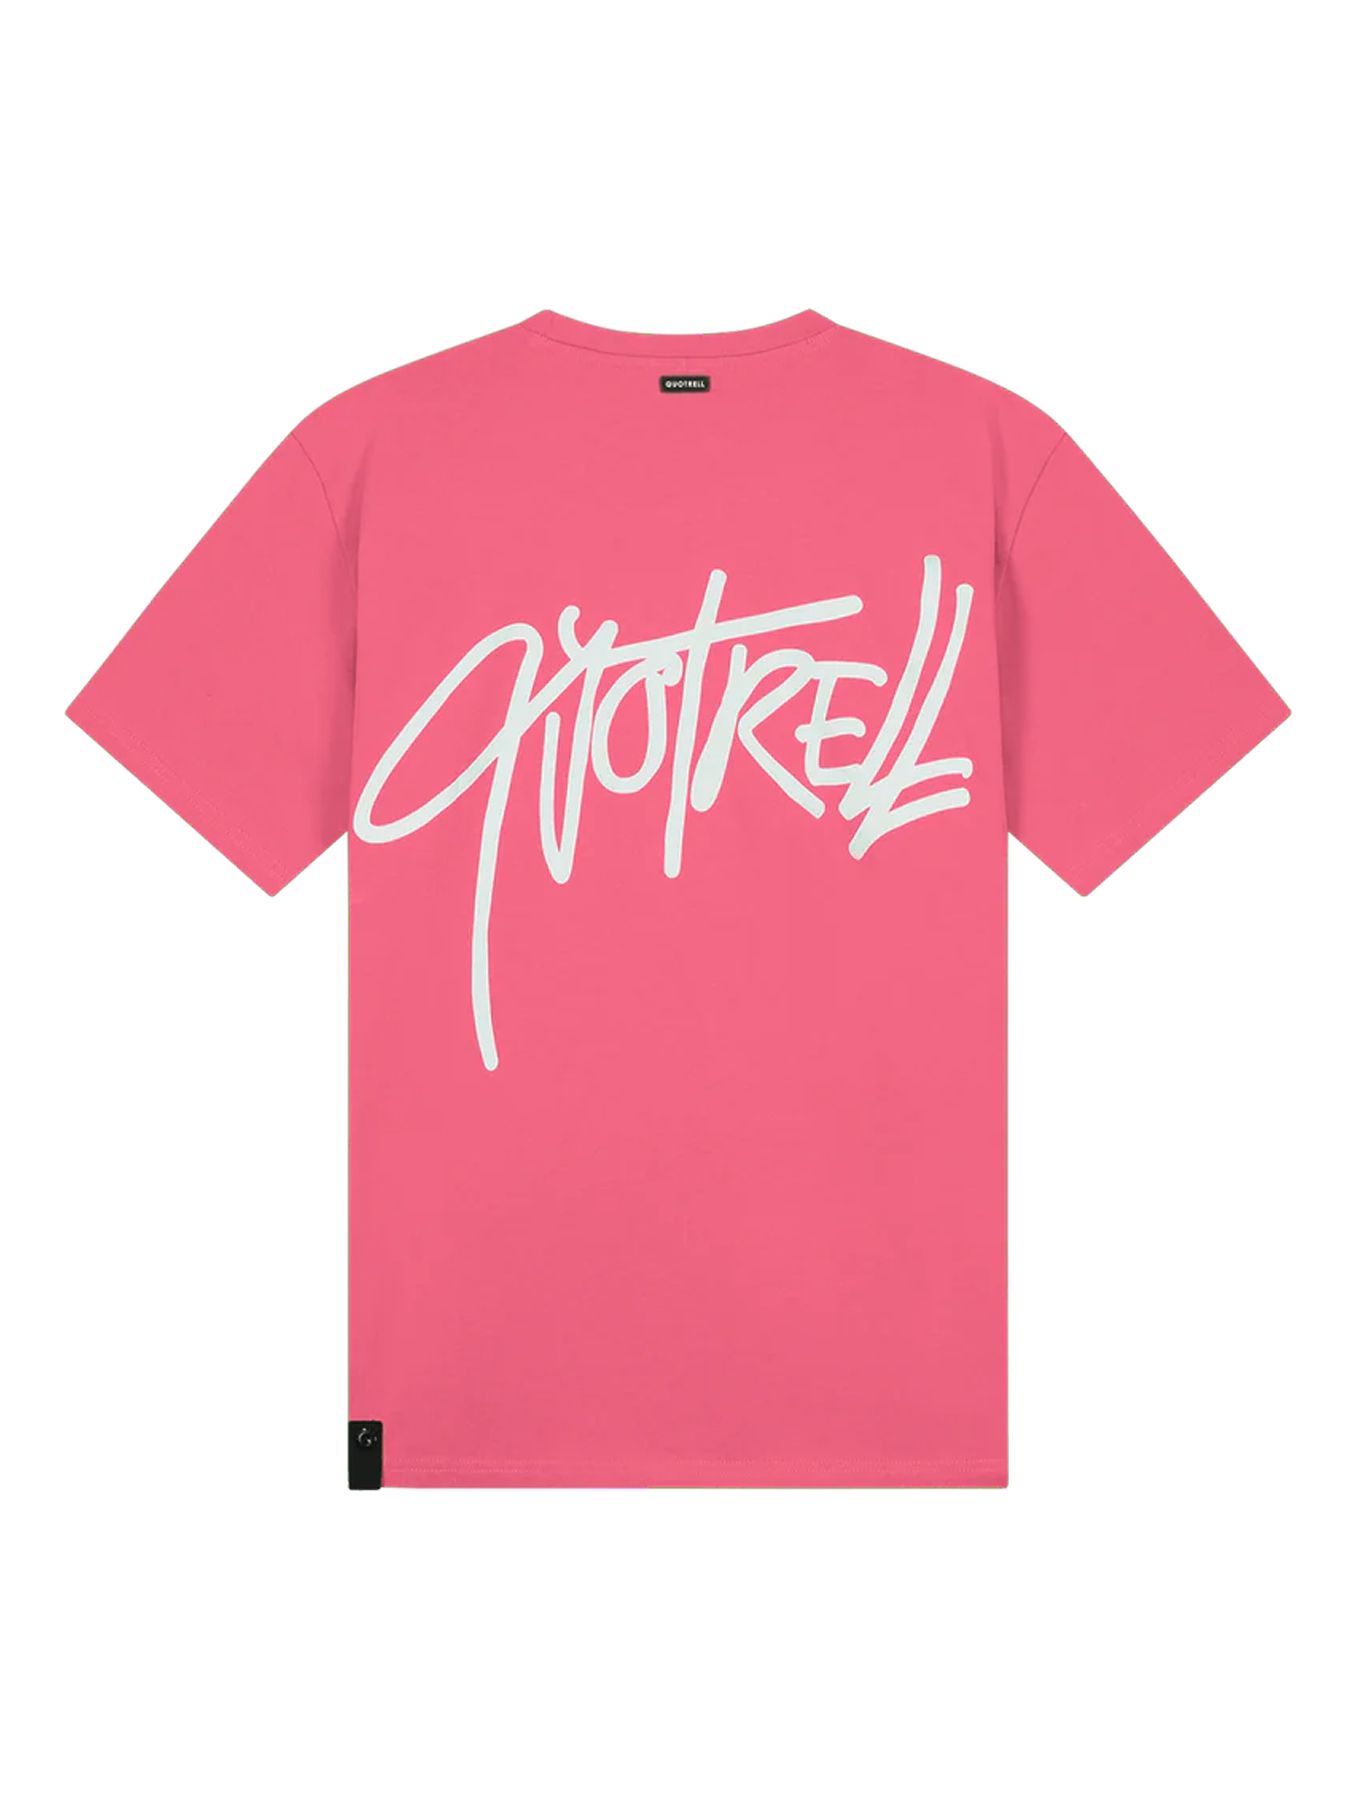 Quotrell Monterey T-shirt Pink/White 00104129-PWI